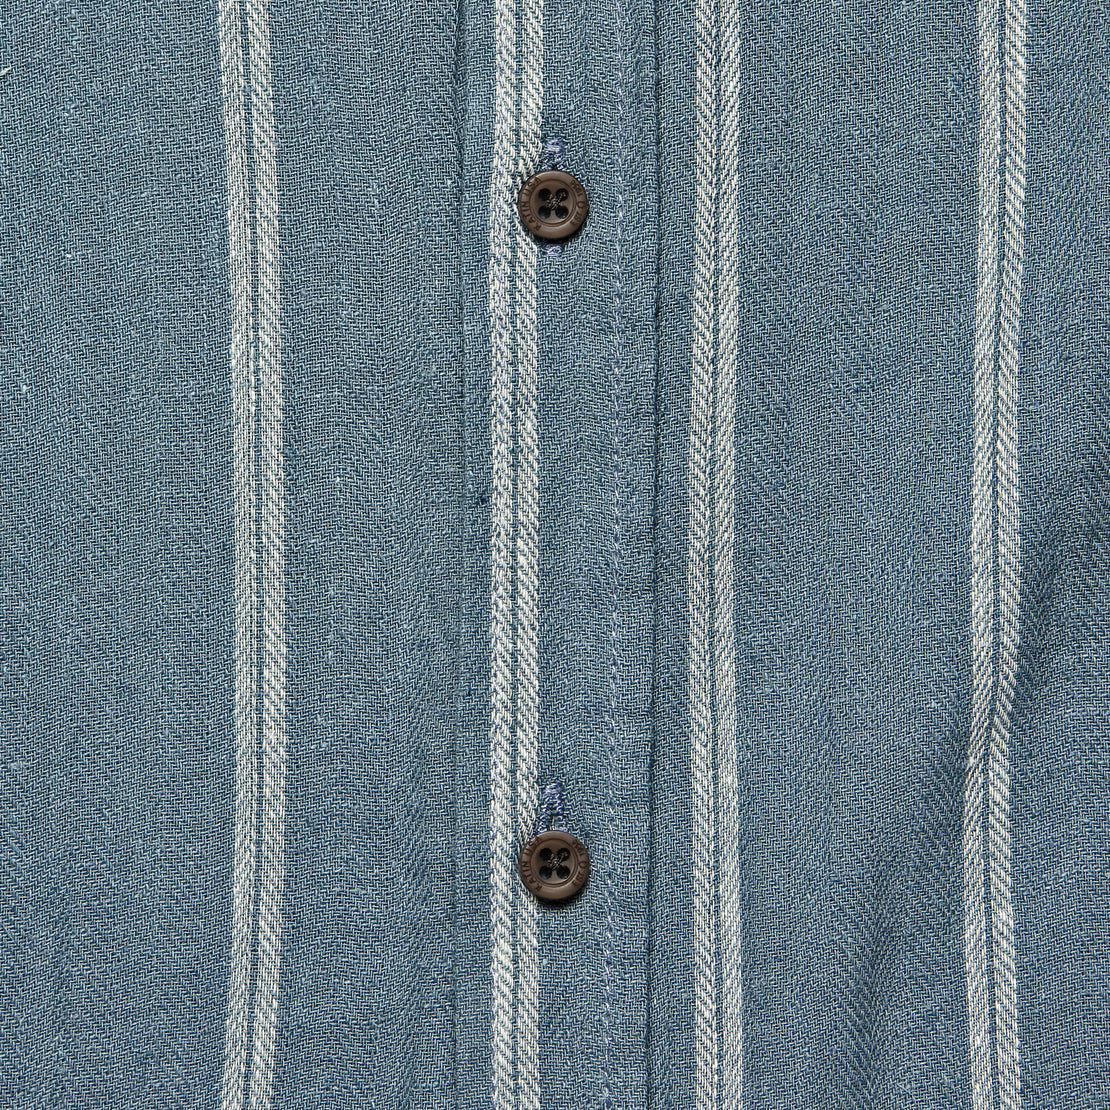 Alan Shirt - Steel Blue - Katin - STAG Provisions - Tops - S/S Woven